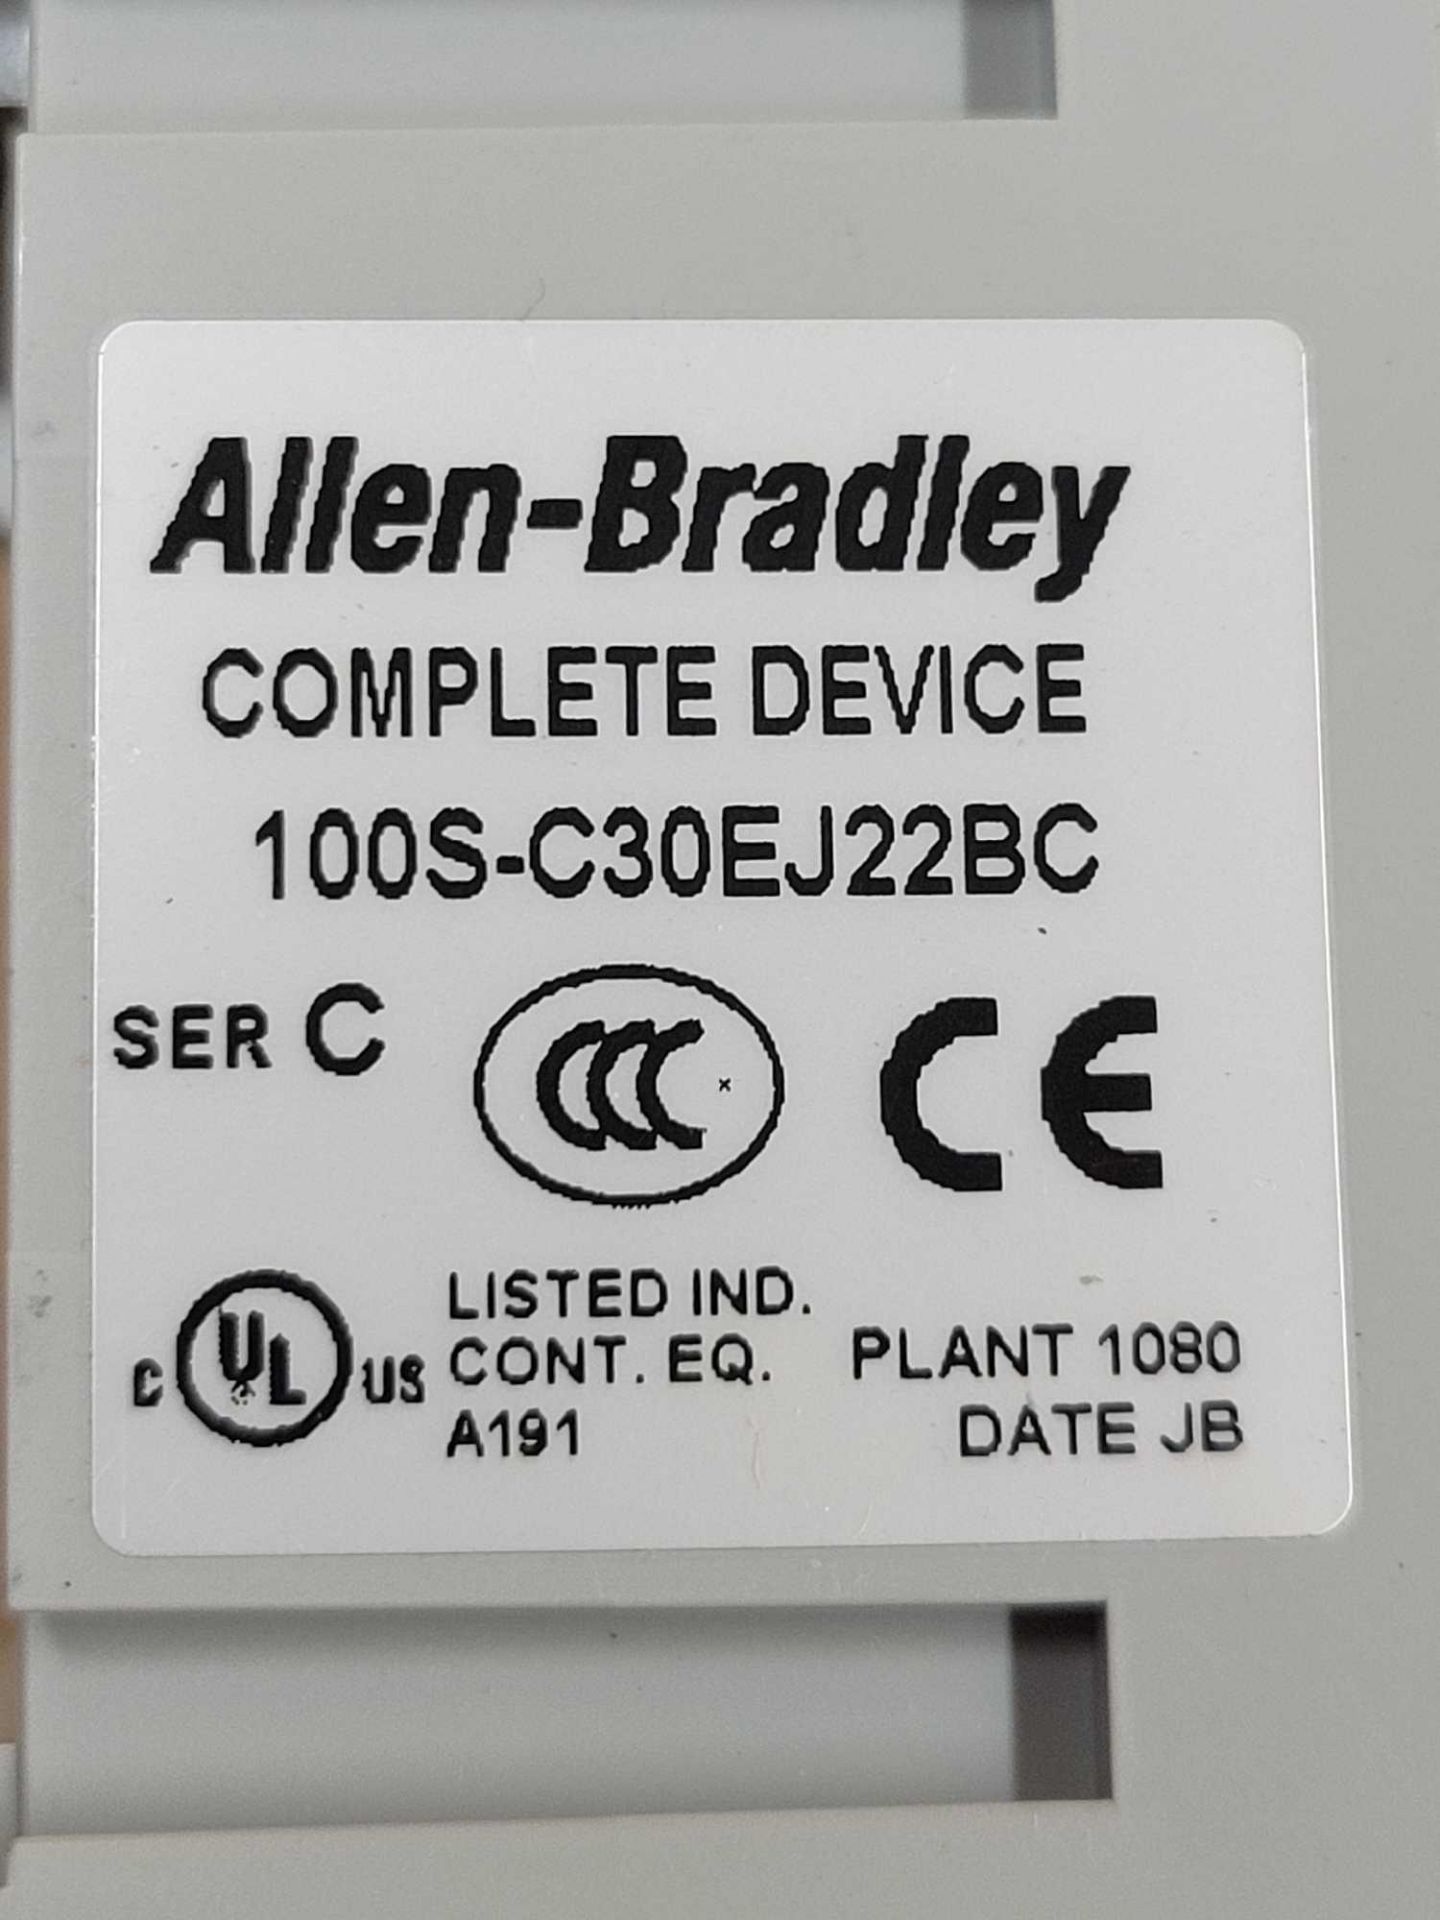 LOT OF 5 ALLEN BRADLEY 100S-C30EJ22BC / Series C Guardmaster Safety Contactor  /  Lot Weight: 6.0 lb - Image 4 of 8